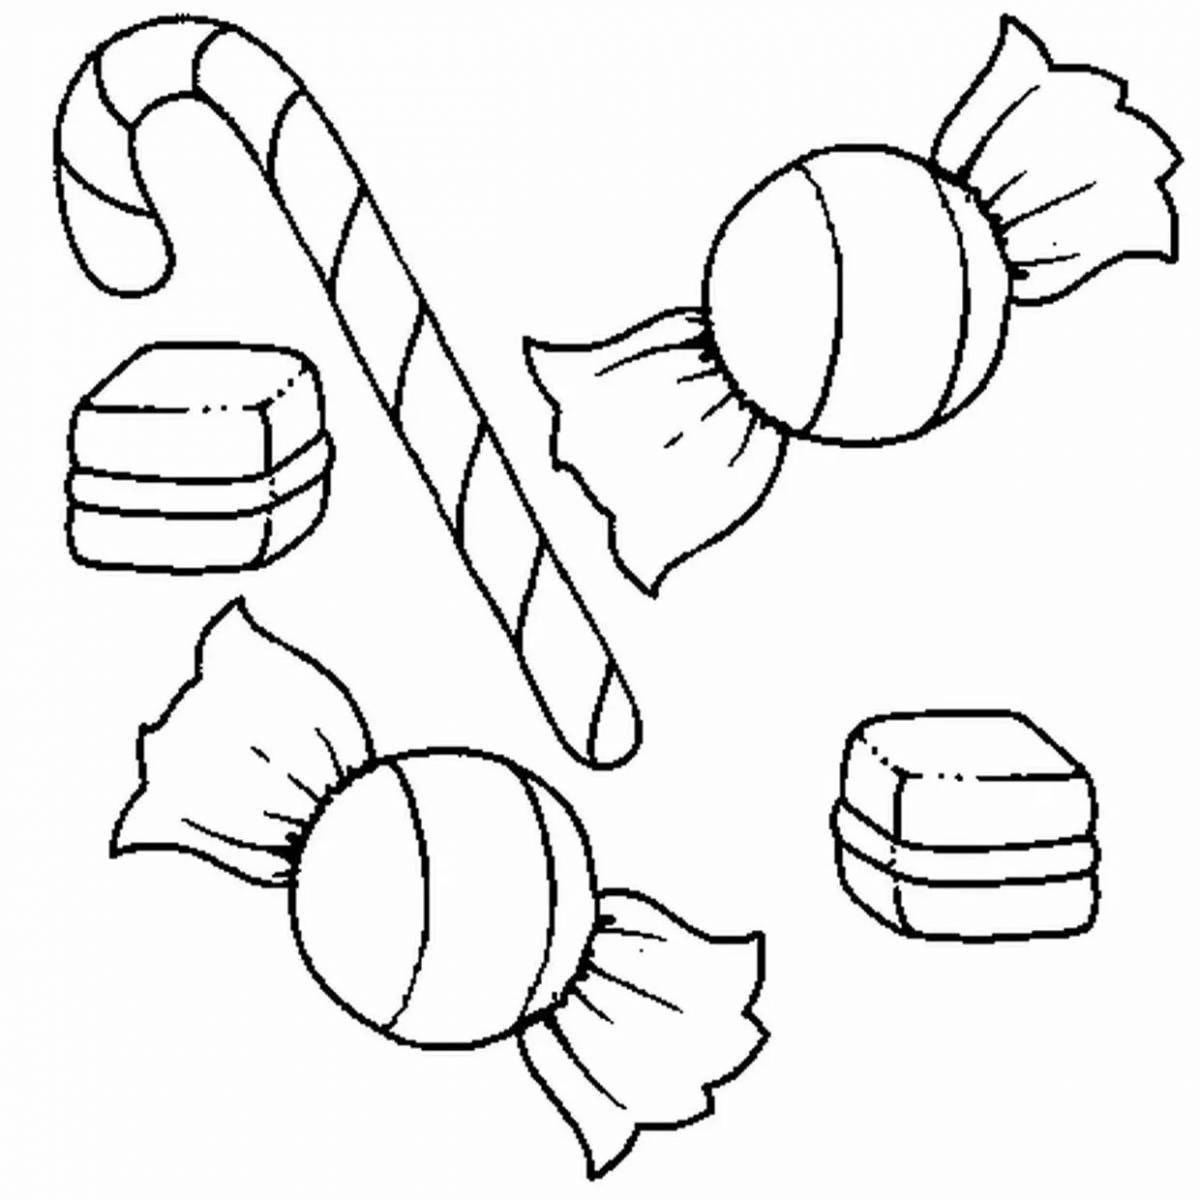 Animated candy figure coloring page